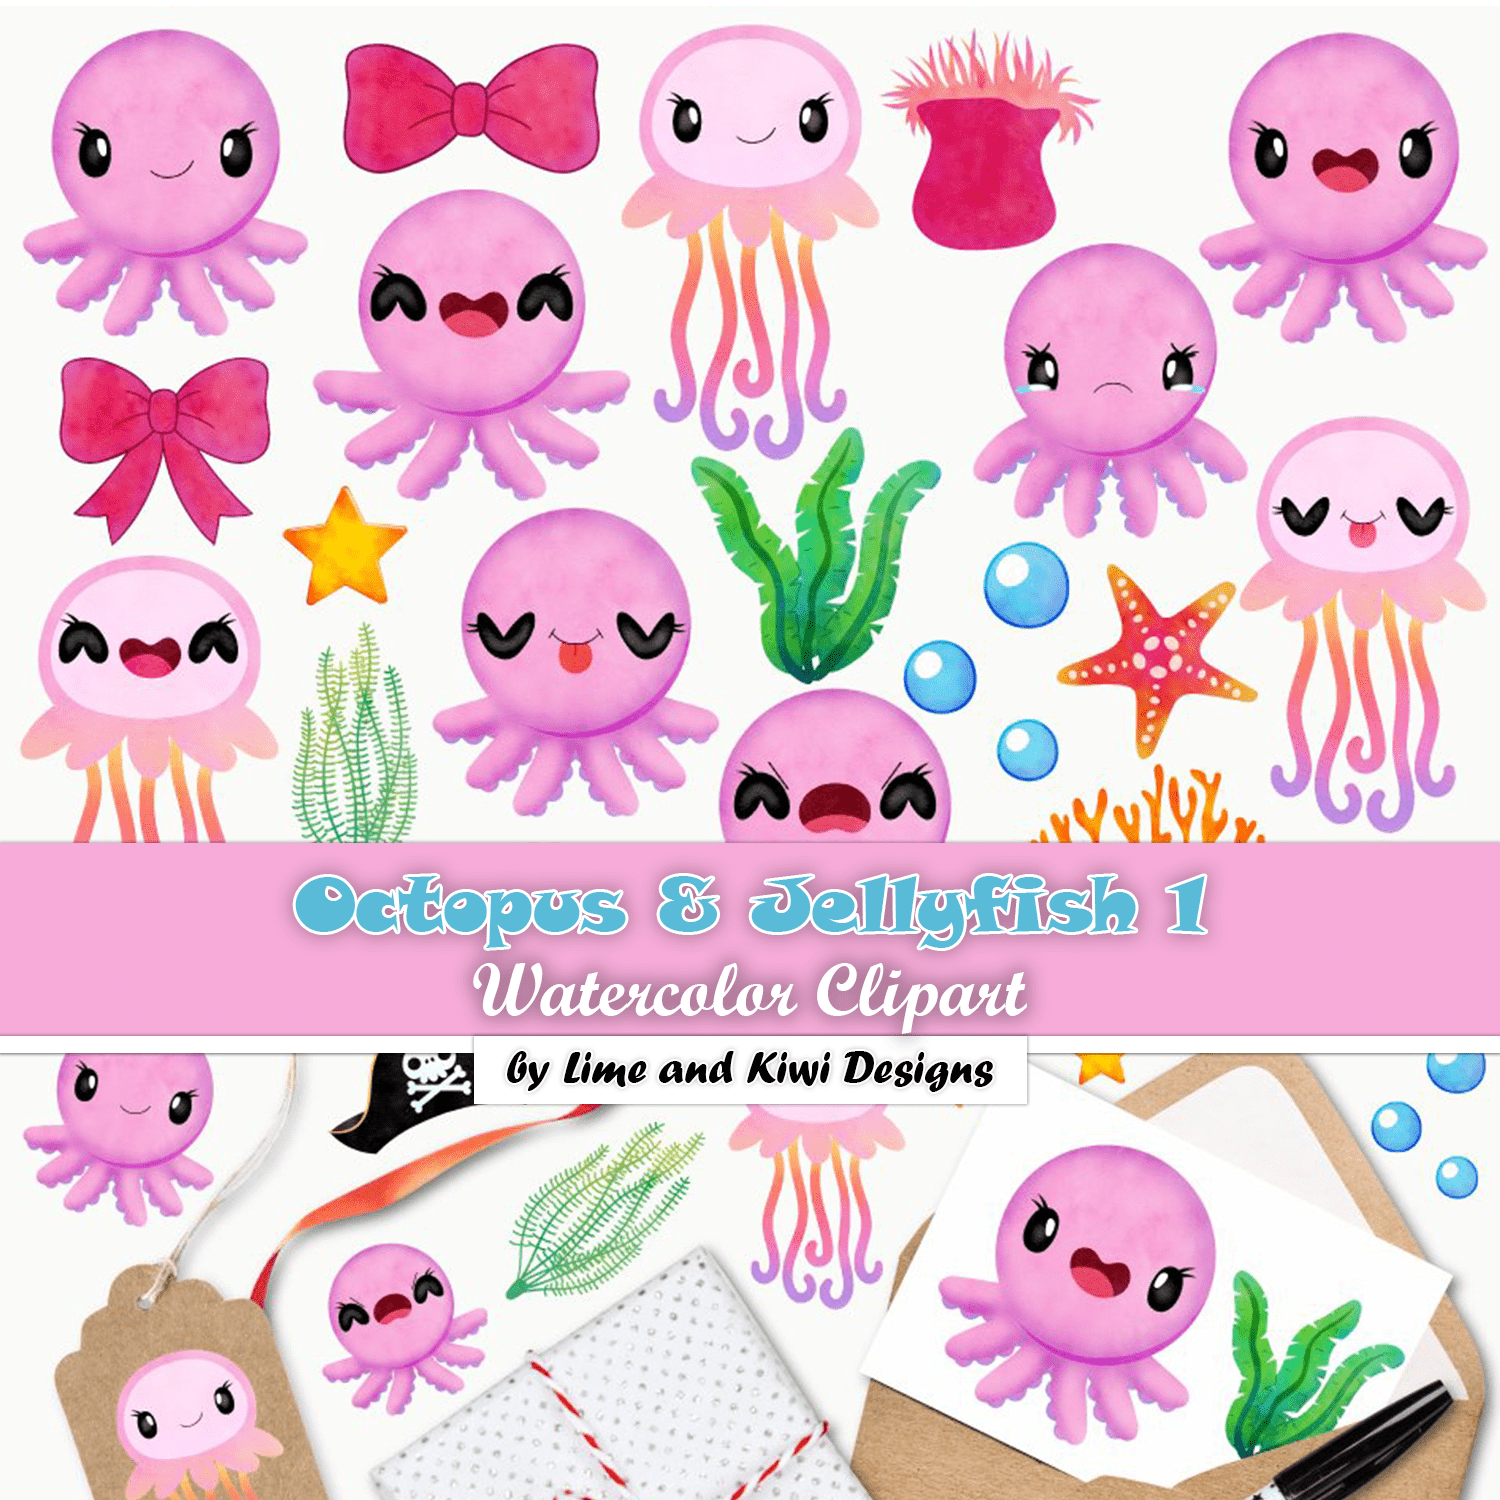 Octopus & Jellyfish 1 Watercolor Clipart, Instant Download cover.